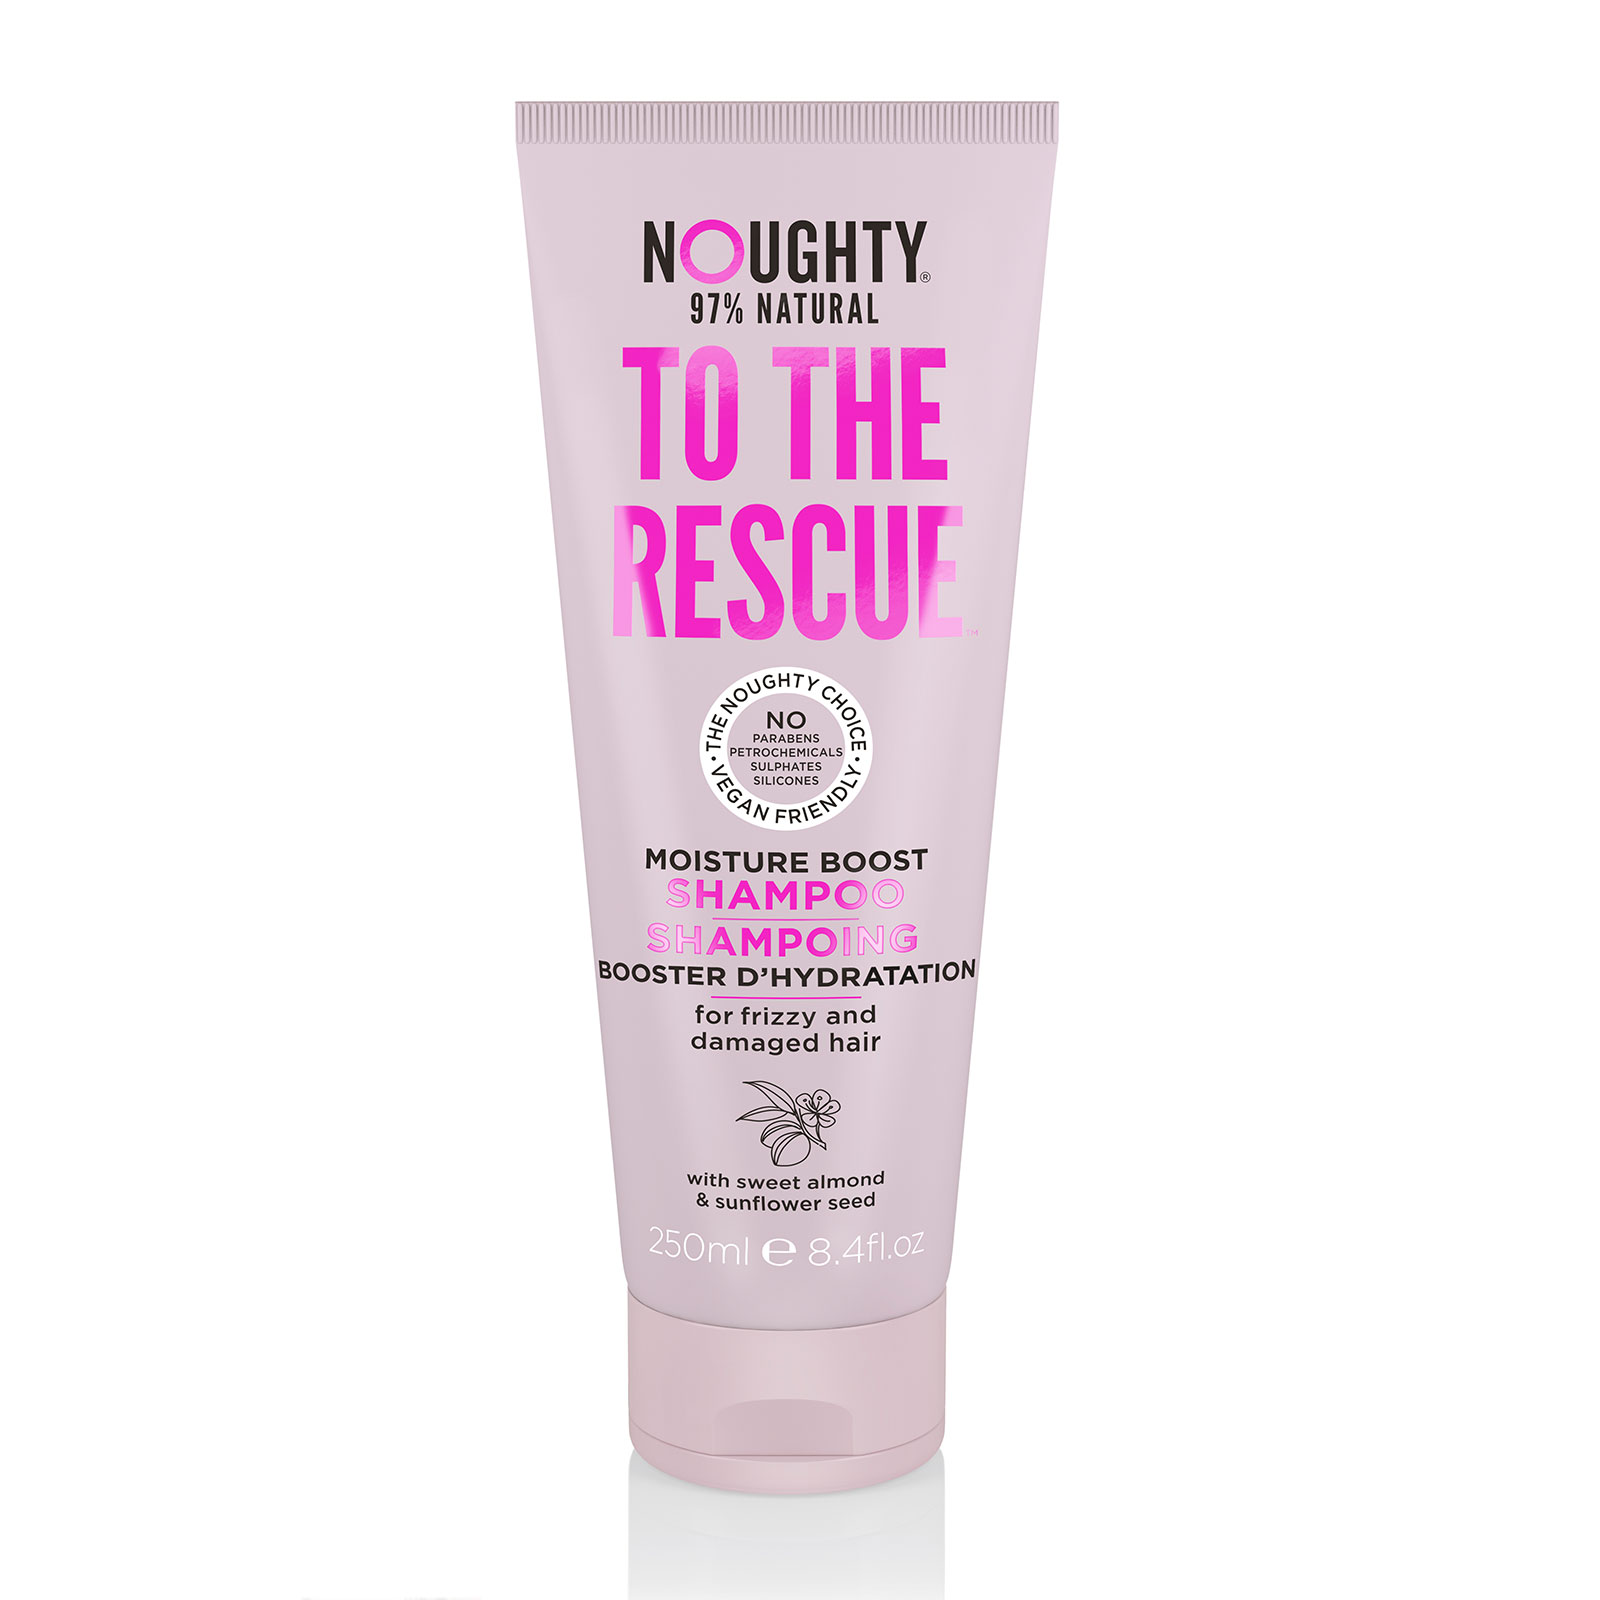 Noughty To The Rescue Moisture Boost Shampoo 250Ml